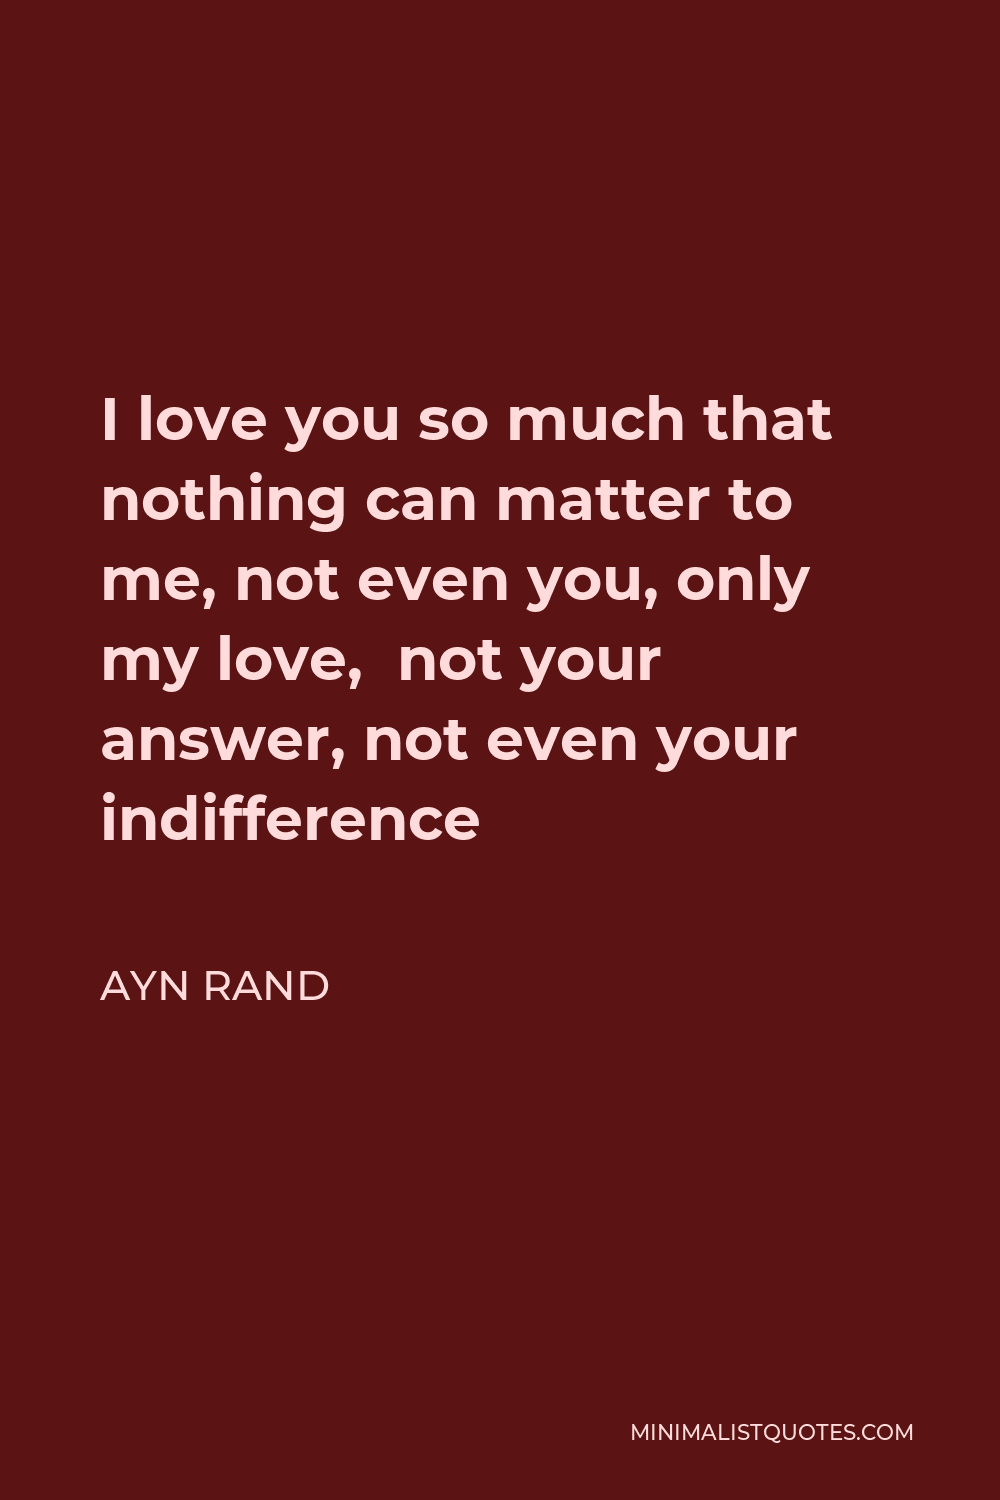 Ayn Rand Quote - I love you so much that nothing can matter to me, not even you, only my love, not your answer, not even your indifference